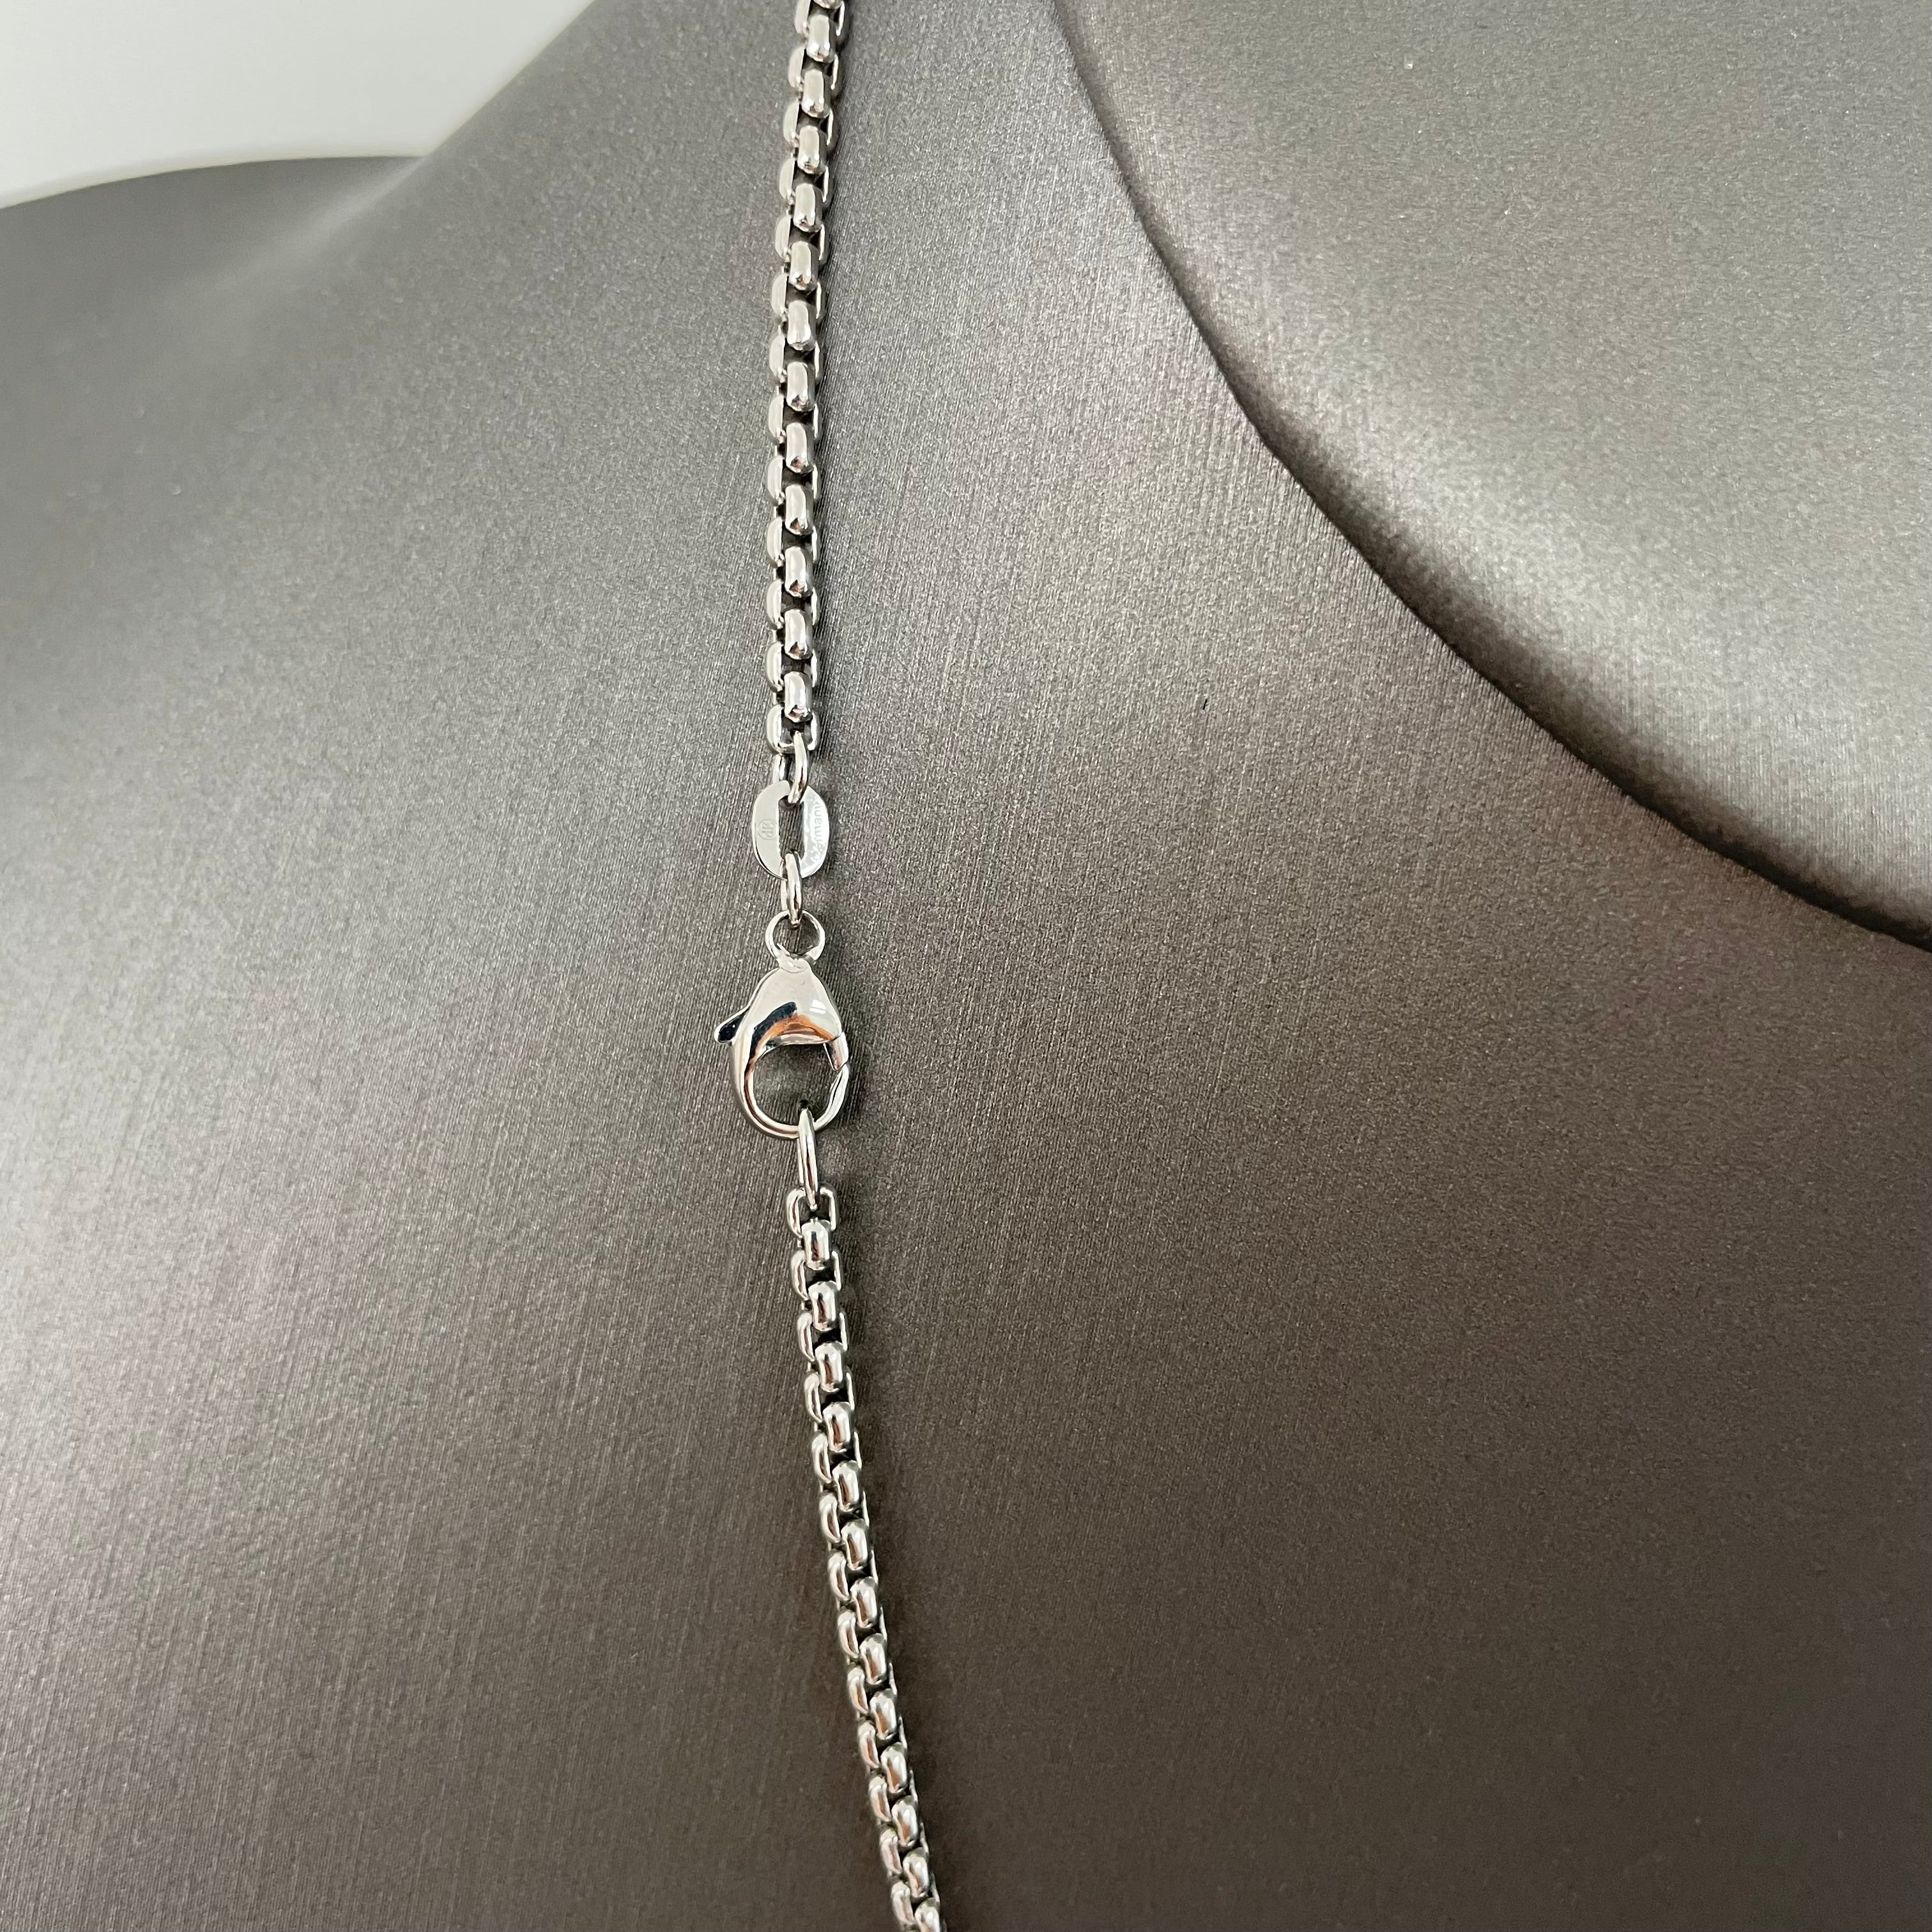 24.1 Grams Solid 950 Platinum Chain 22 Inch & 3.3 MM Necklace | eBay